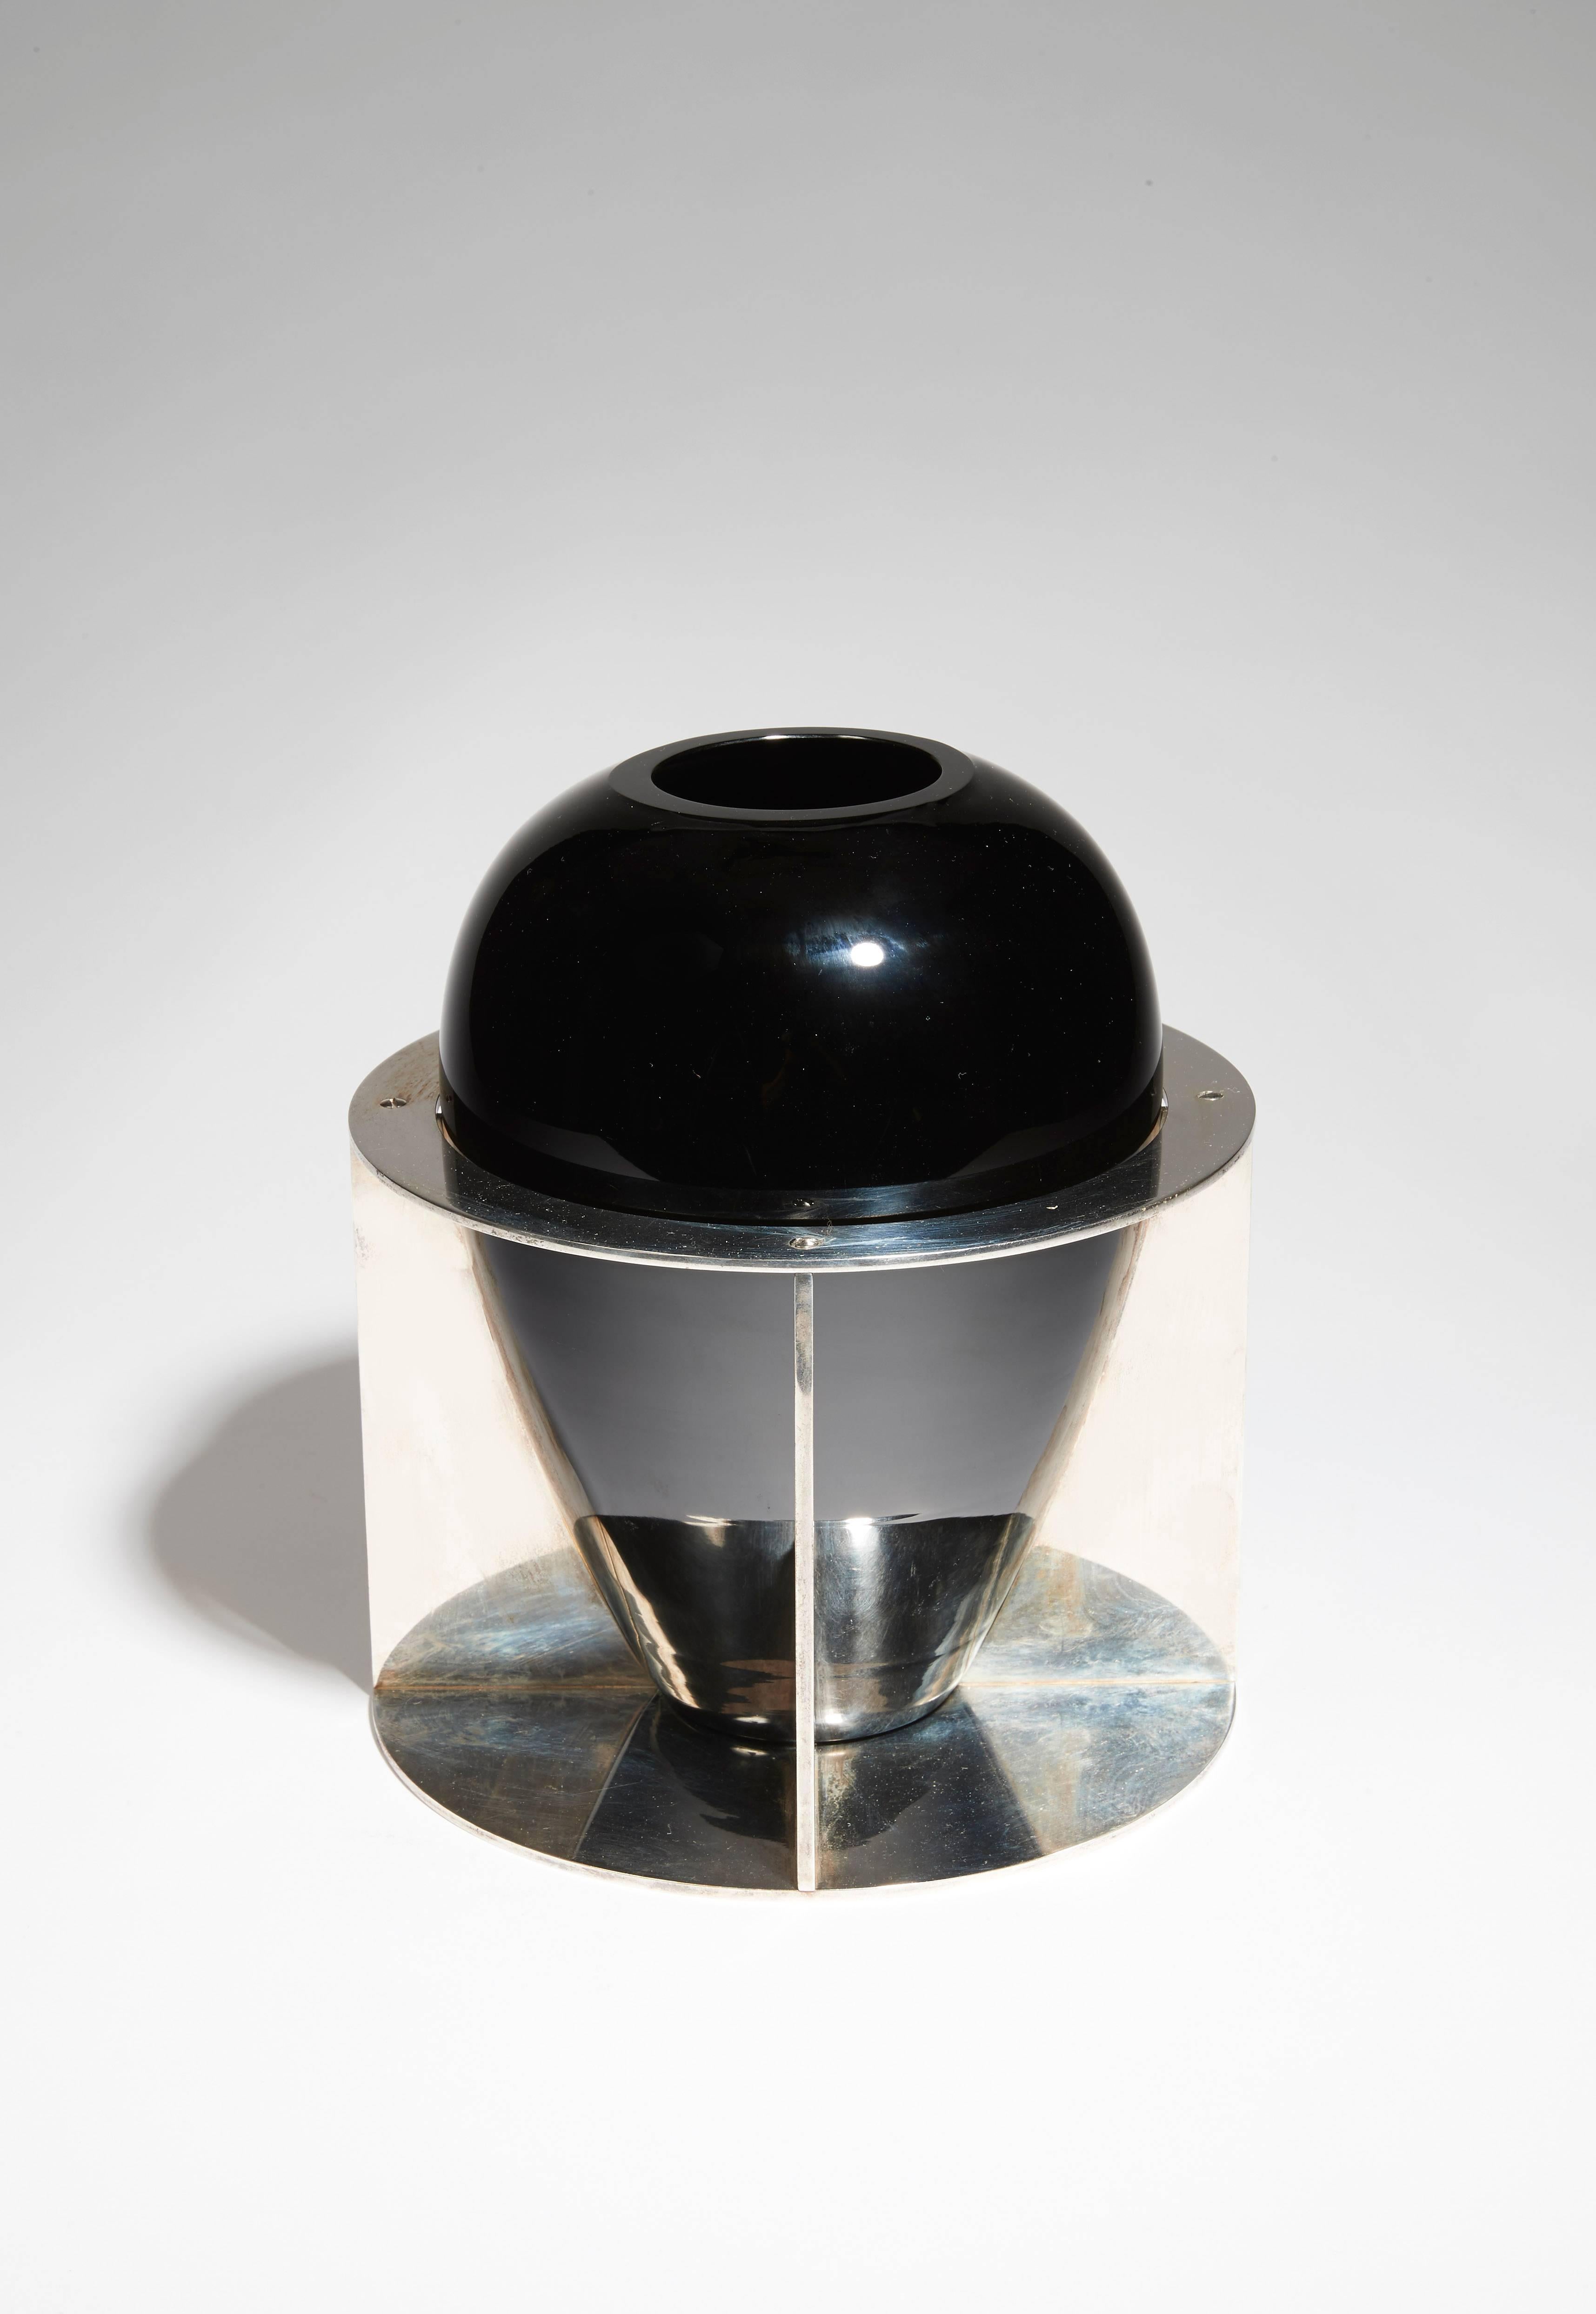 In opal black glass based on a nickel-plated metal structure with a circular shape and blades.

Signed with the stamp 